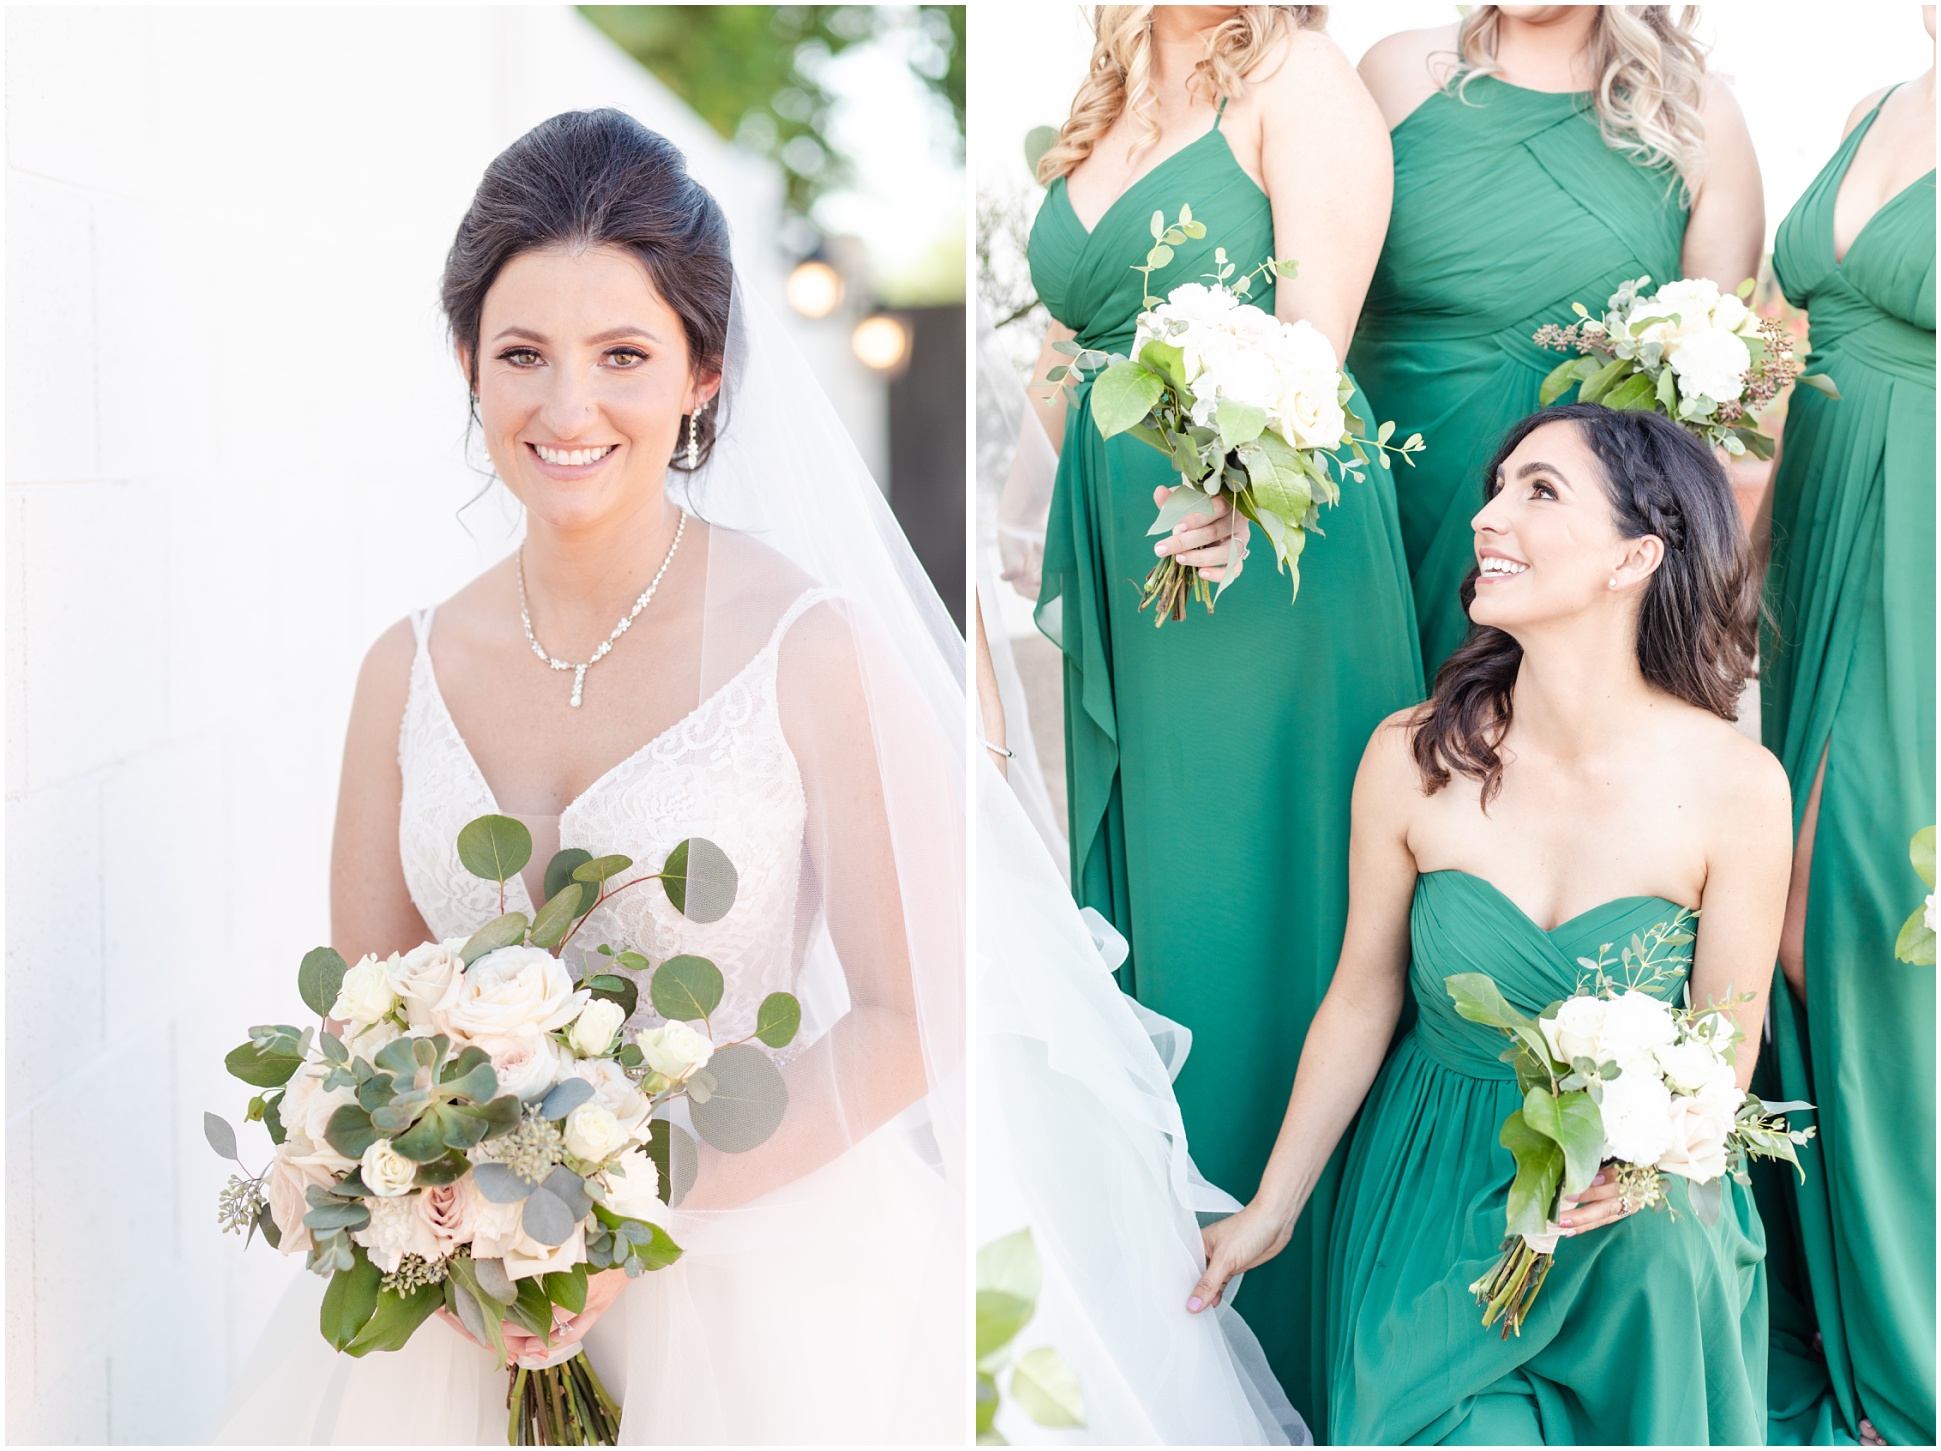 Bride smiling at camera holding champagne rose bouquet, Bridesmaids holding bouquets in green dresses